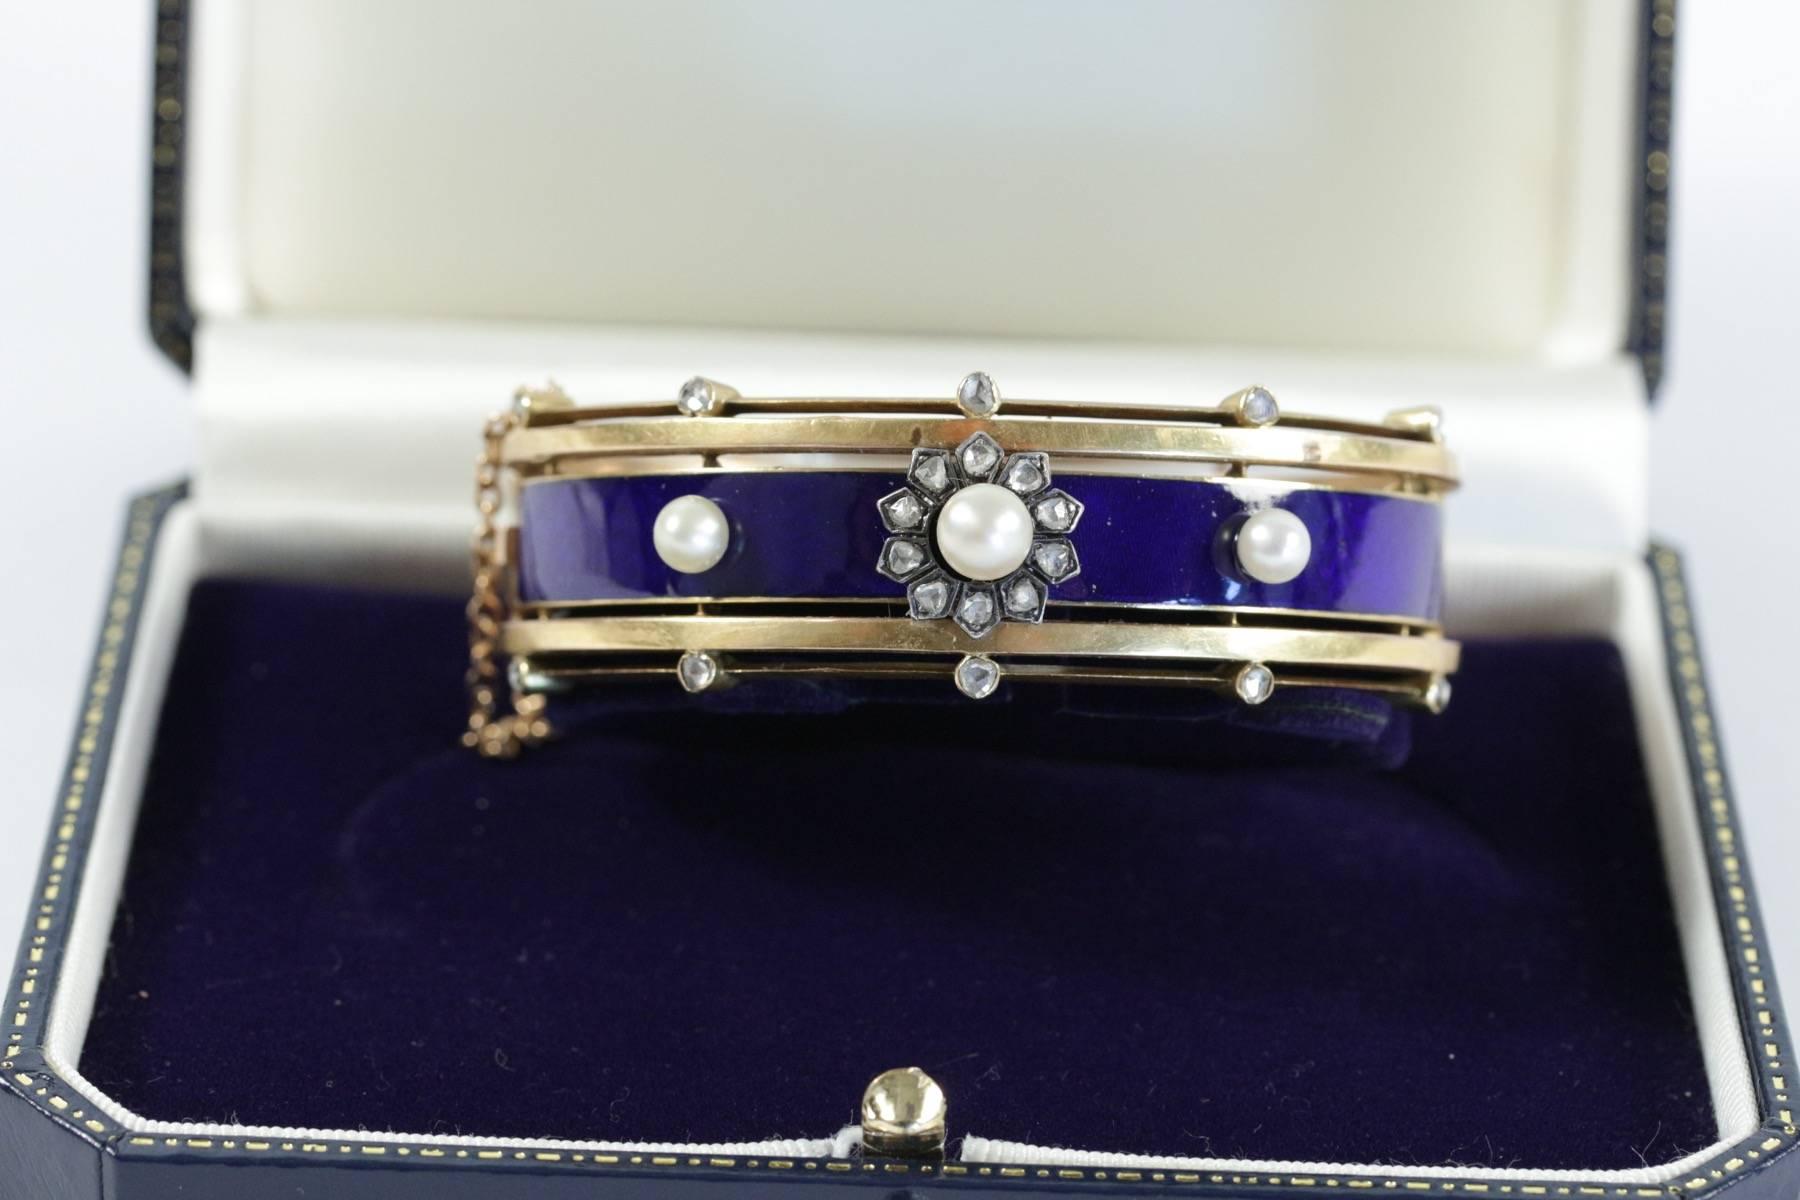 A Napoleon III 18k yellow gold bangle with blue enamel set with rose cut diamonds and pearls. French work. Circa 1870.